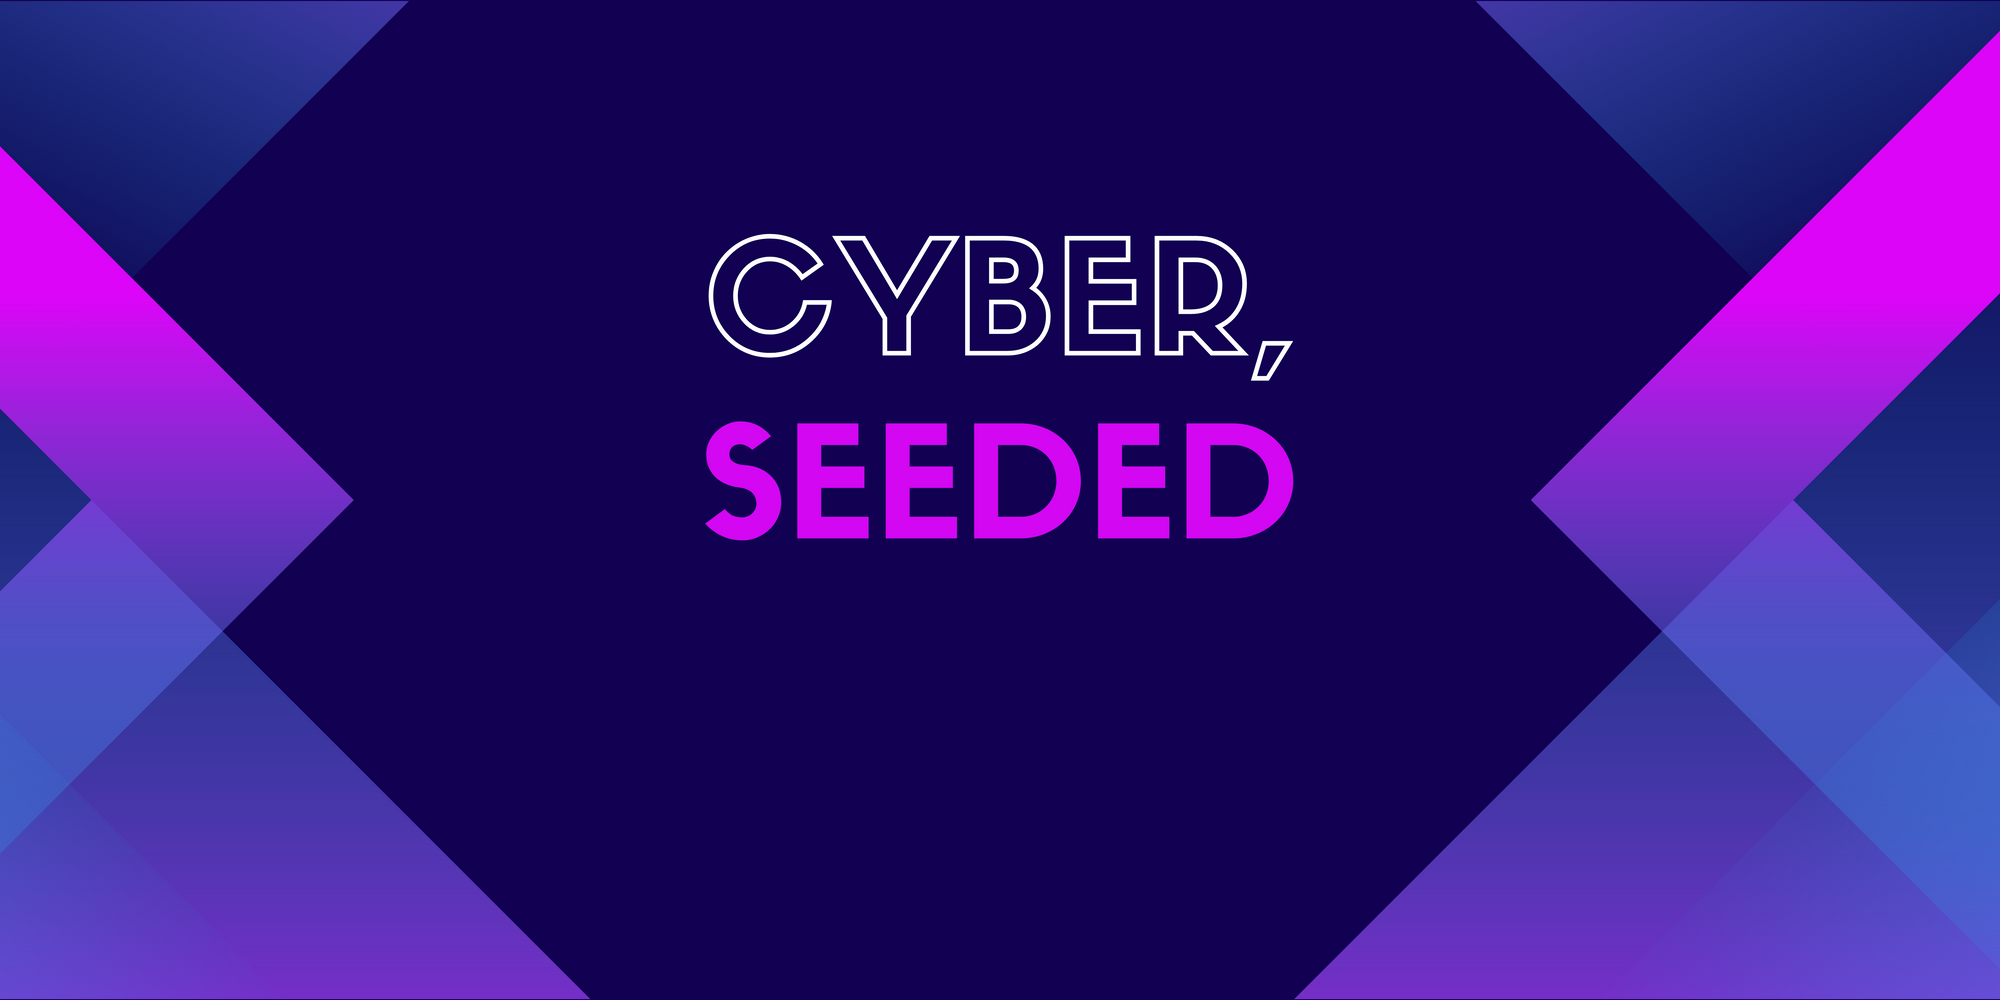 Cyber, Seeded.